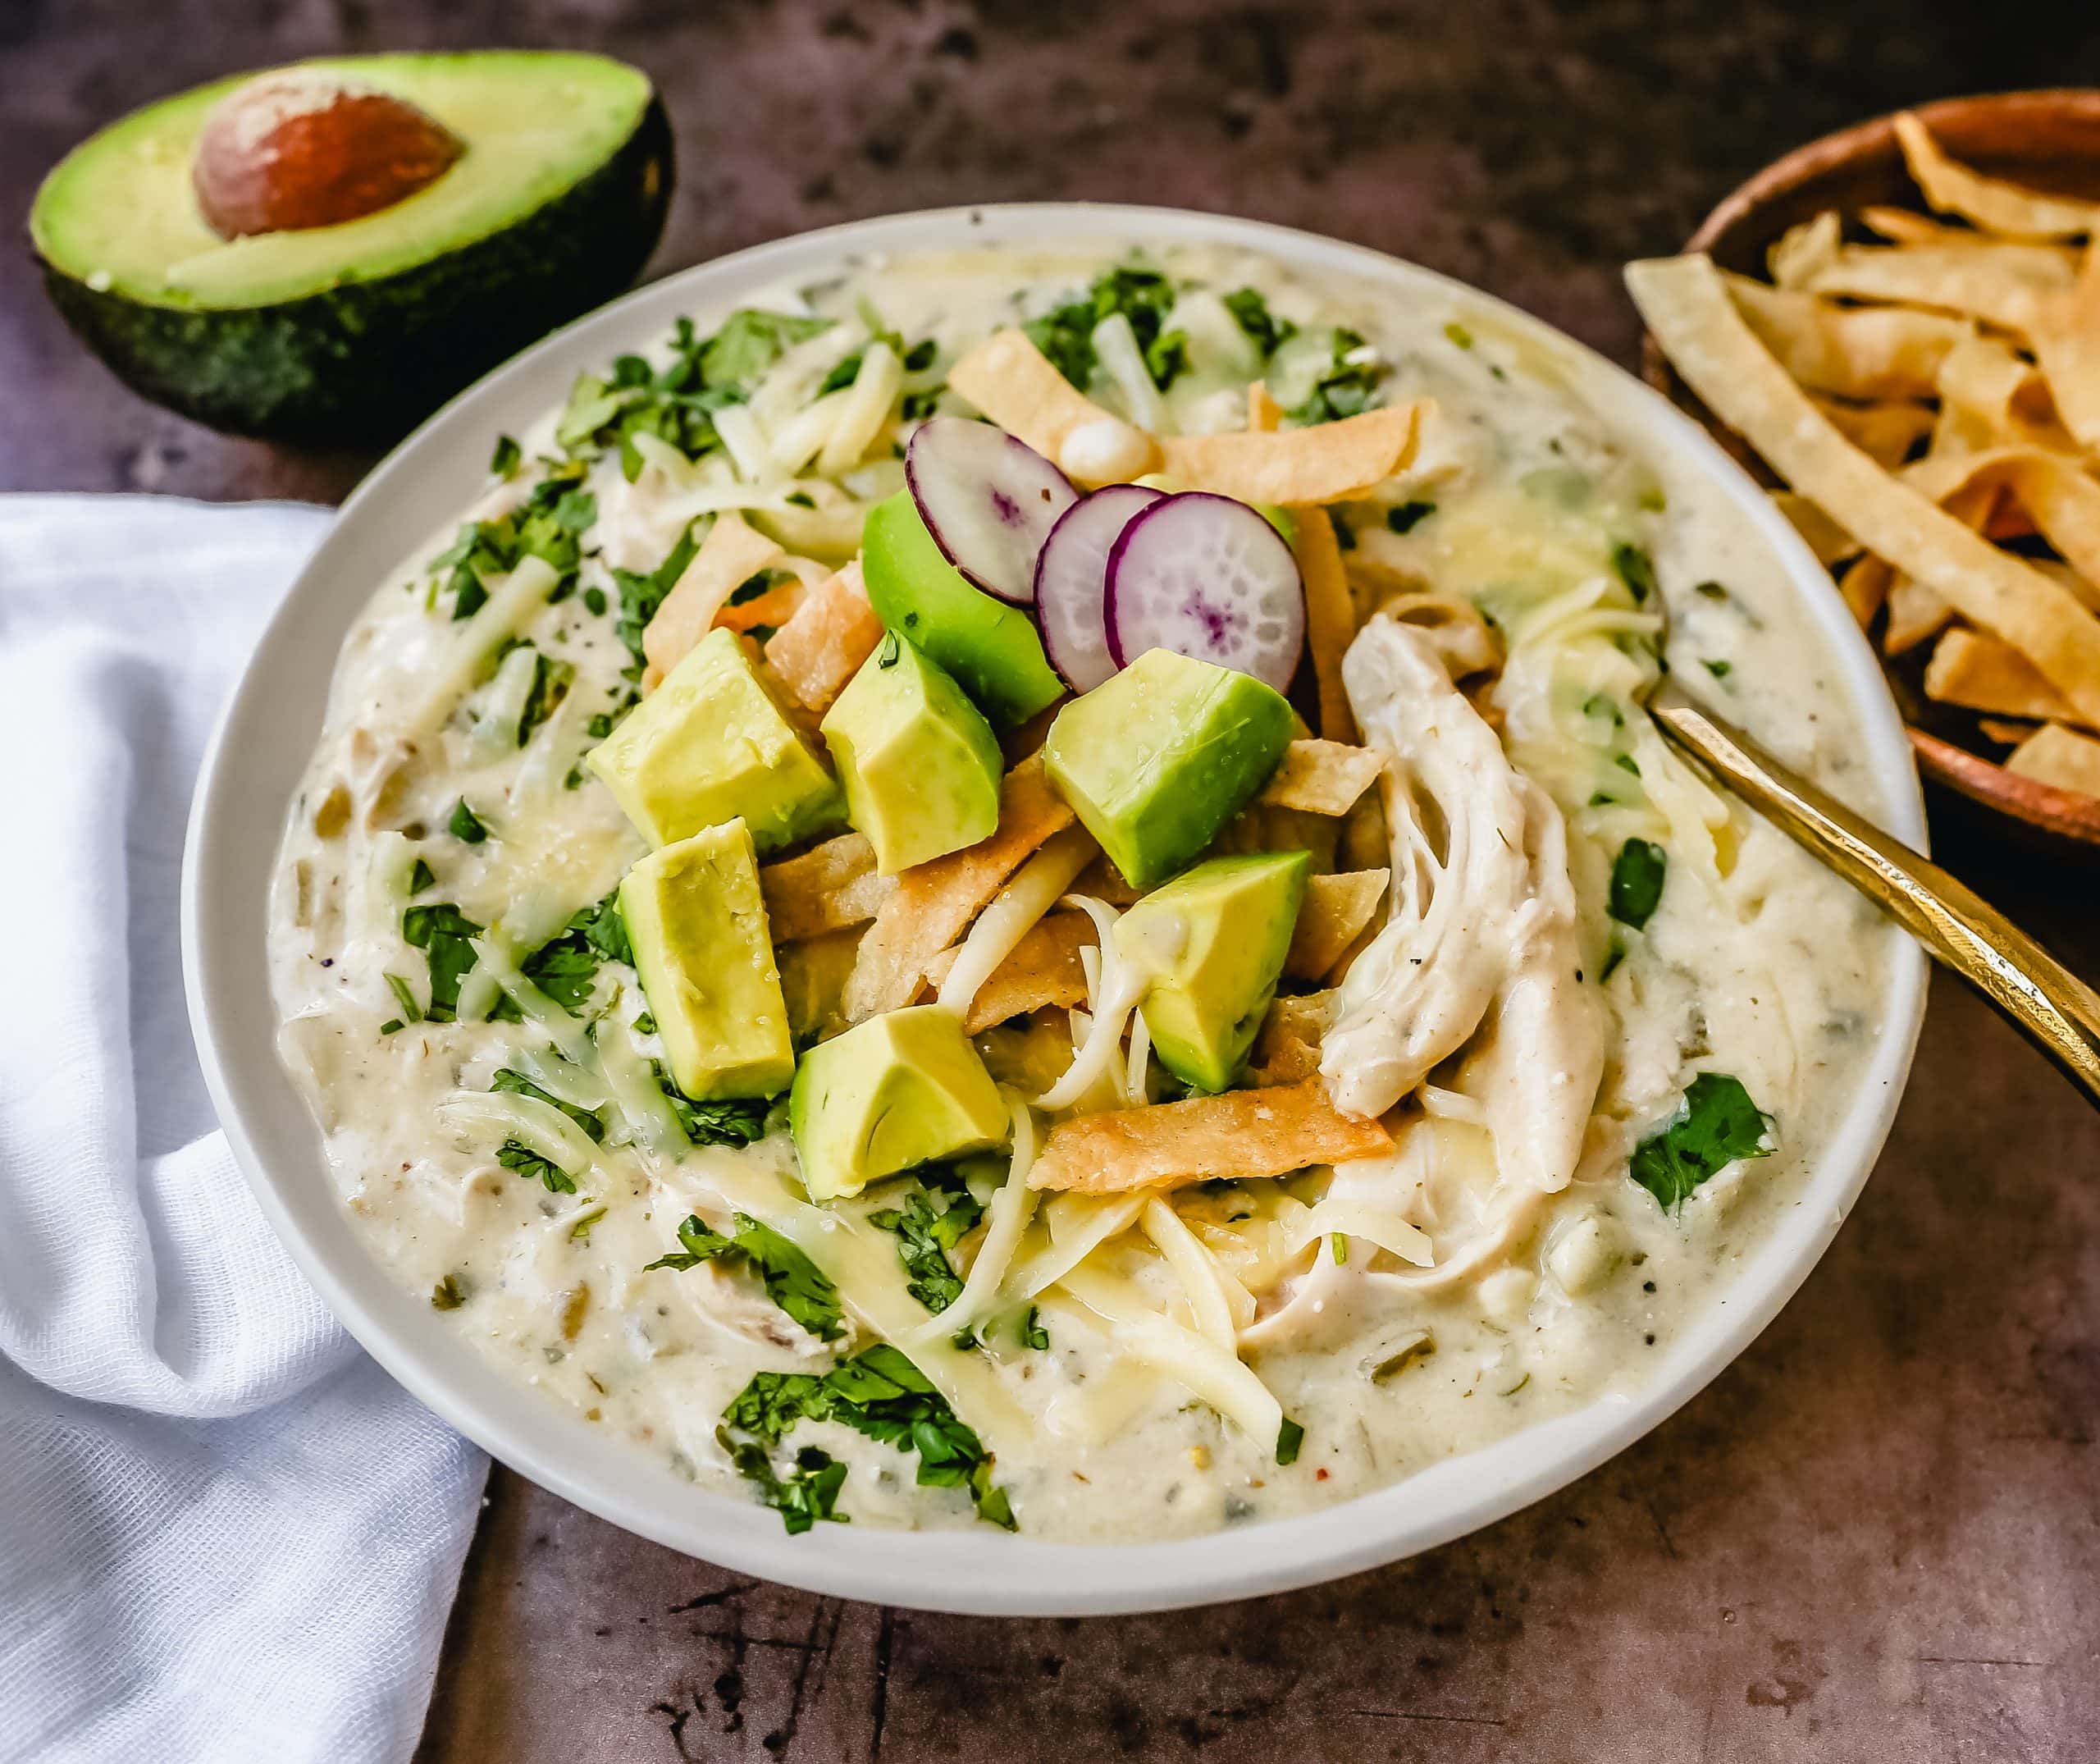 This Green Chile Chicken Enchilada Soup is made with tender chicken, green enchilada sauce, green chilies, cream cheese all in a chicken broth and topped with homemade fried tortilla strips, fresh avocado, cilantro, and Monterey Jack cheese. This is the most flavor-packed creamy green chicken enchilada soup recipe.